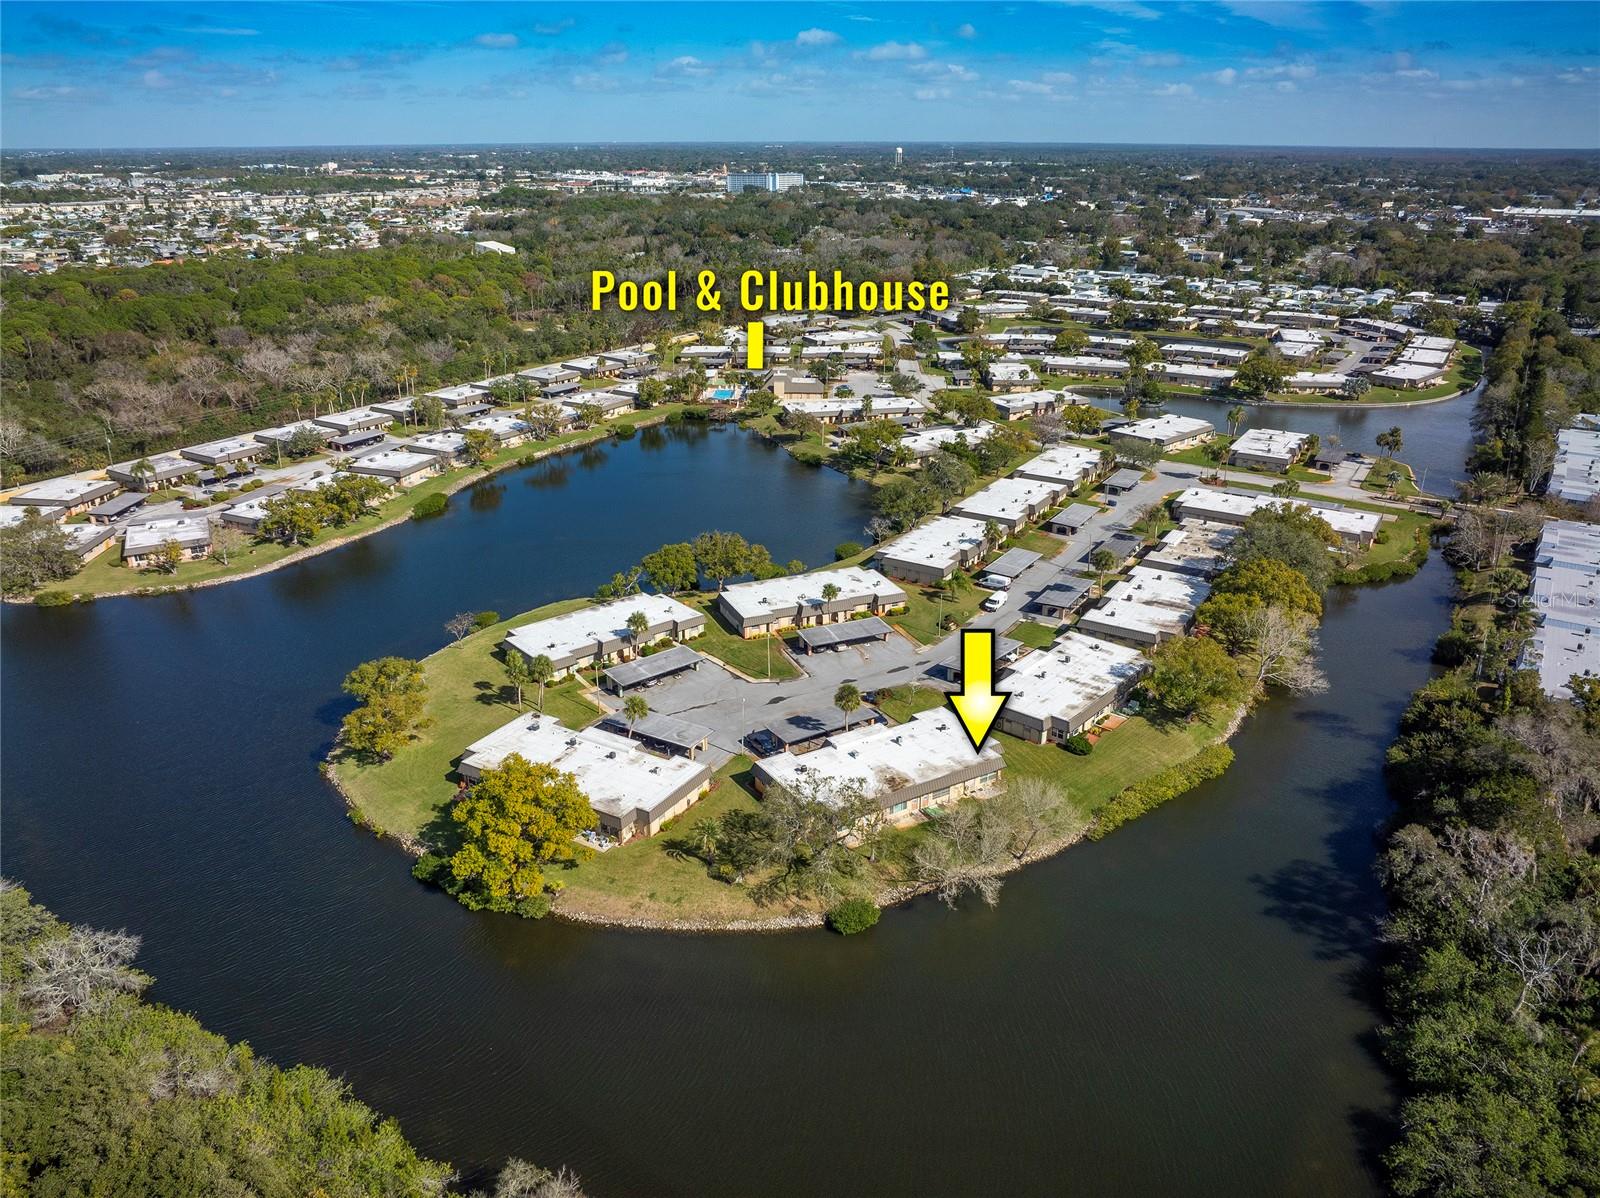 This shows location of clubhouse to the condo